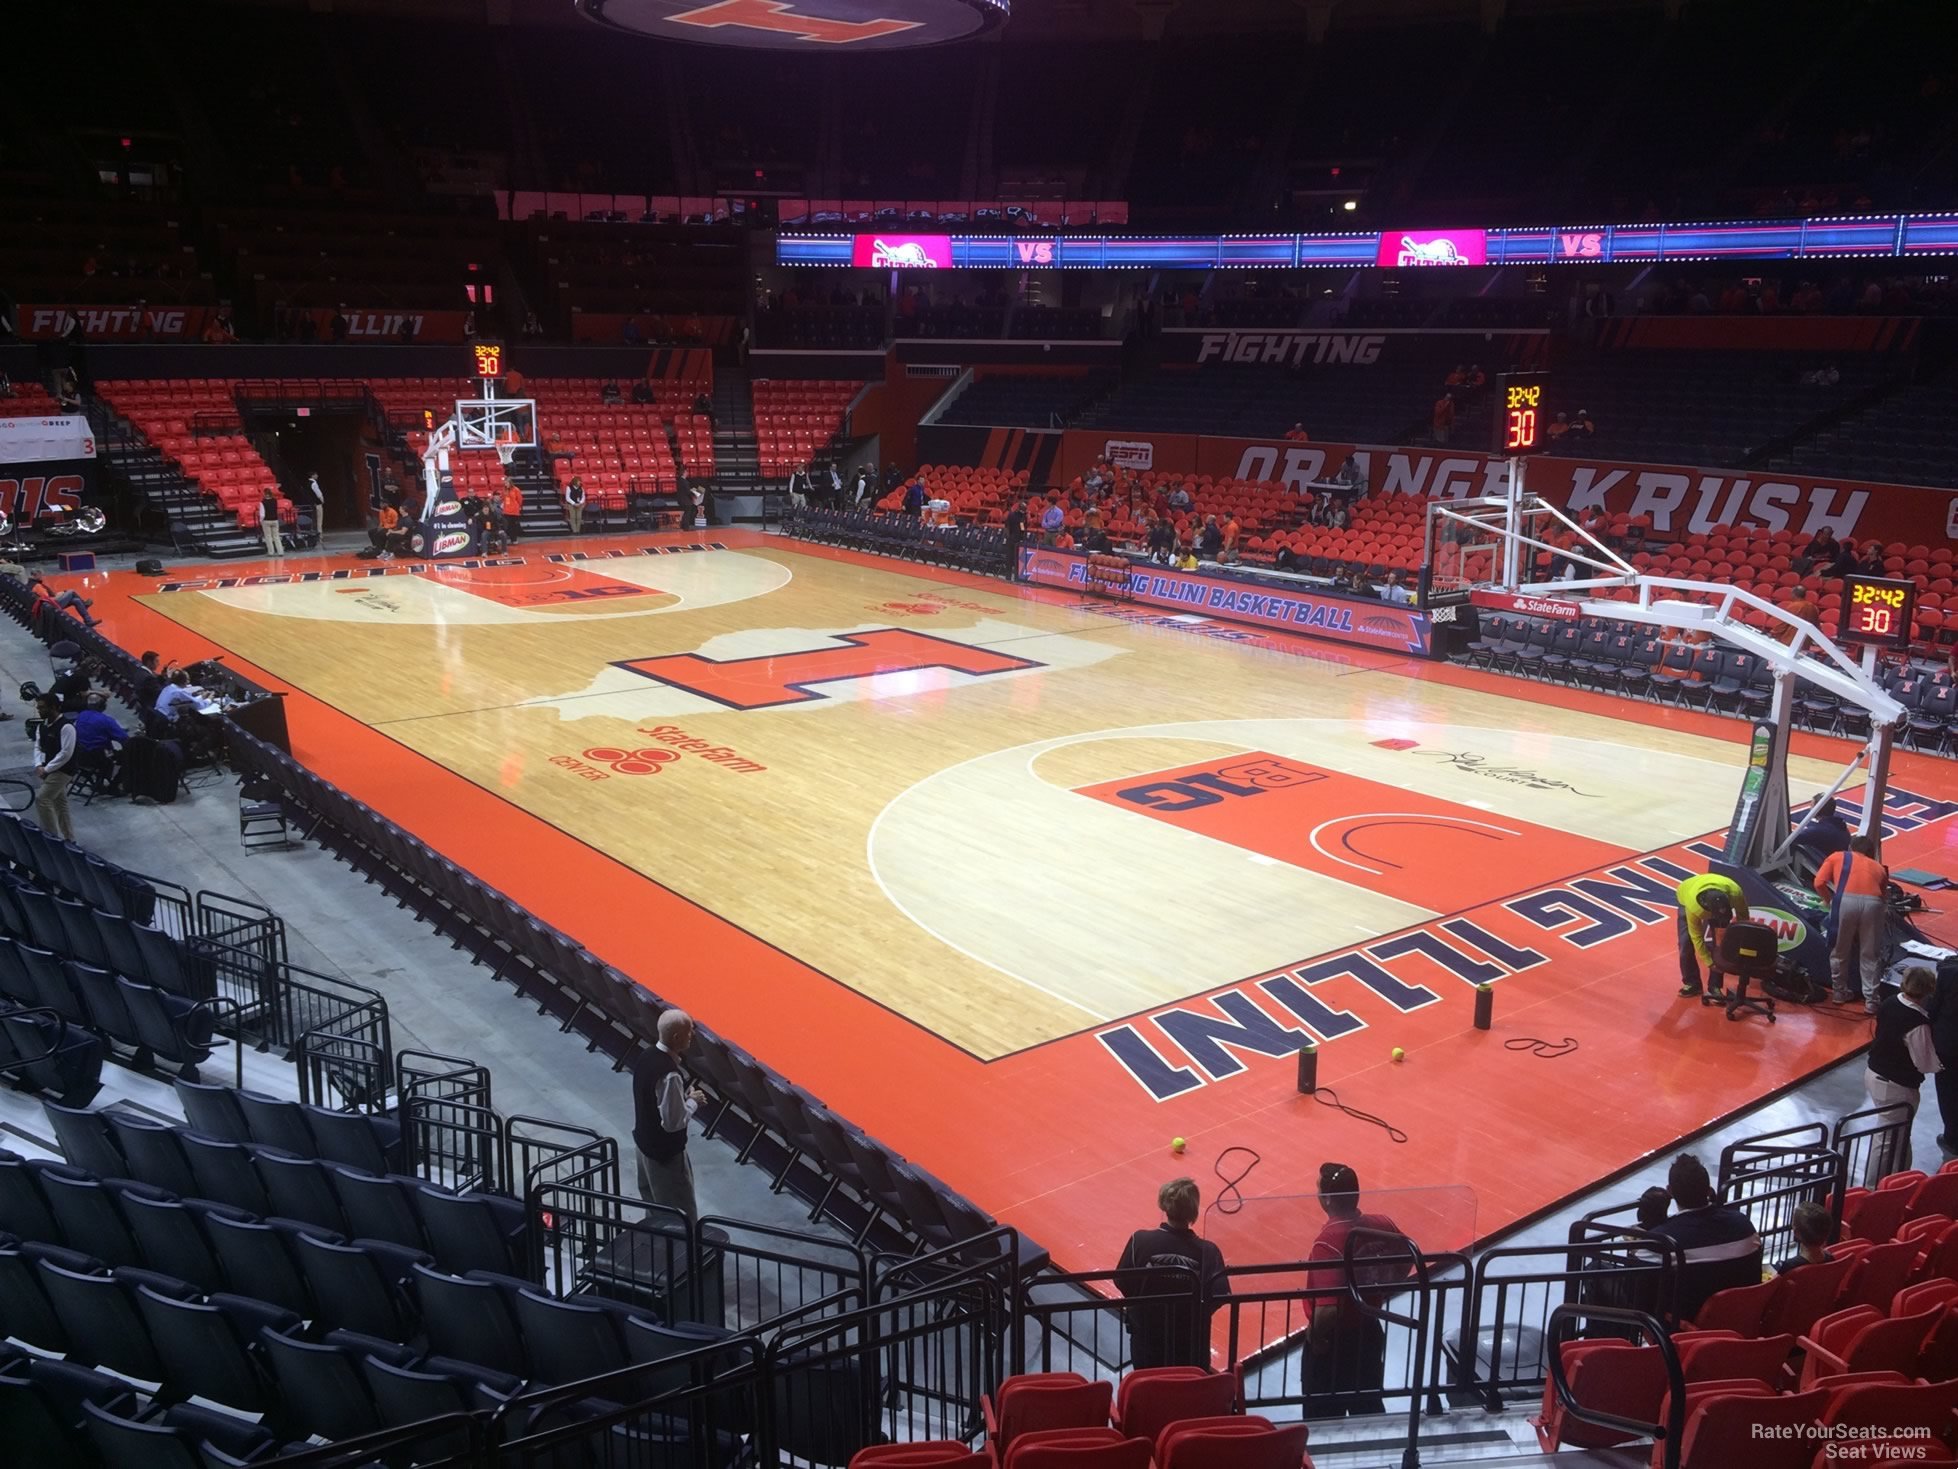 section 118, row 10 seat view  - state farm center